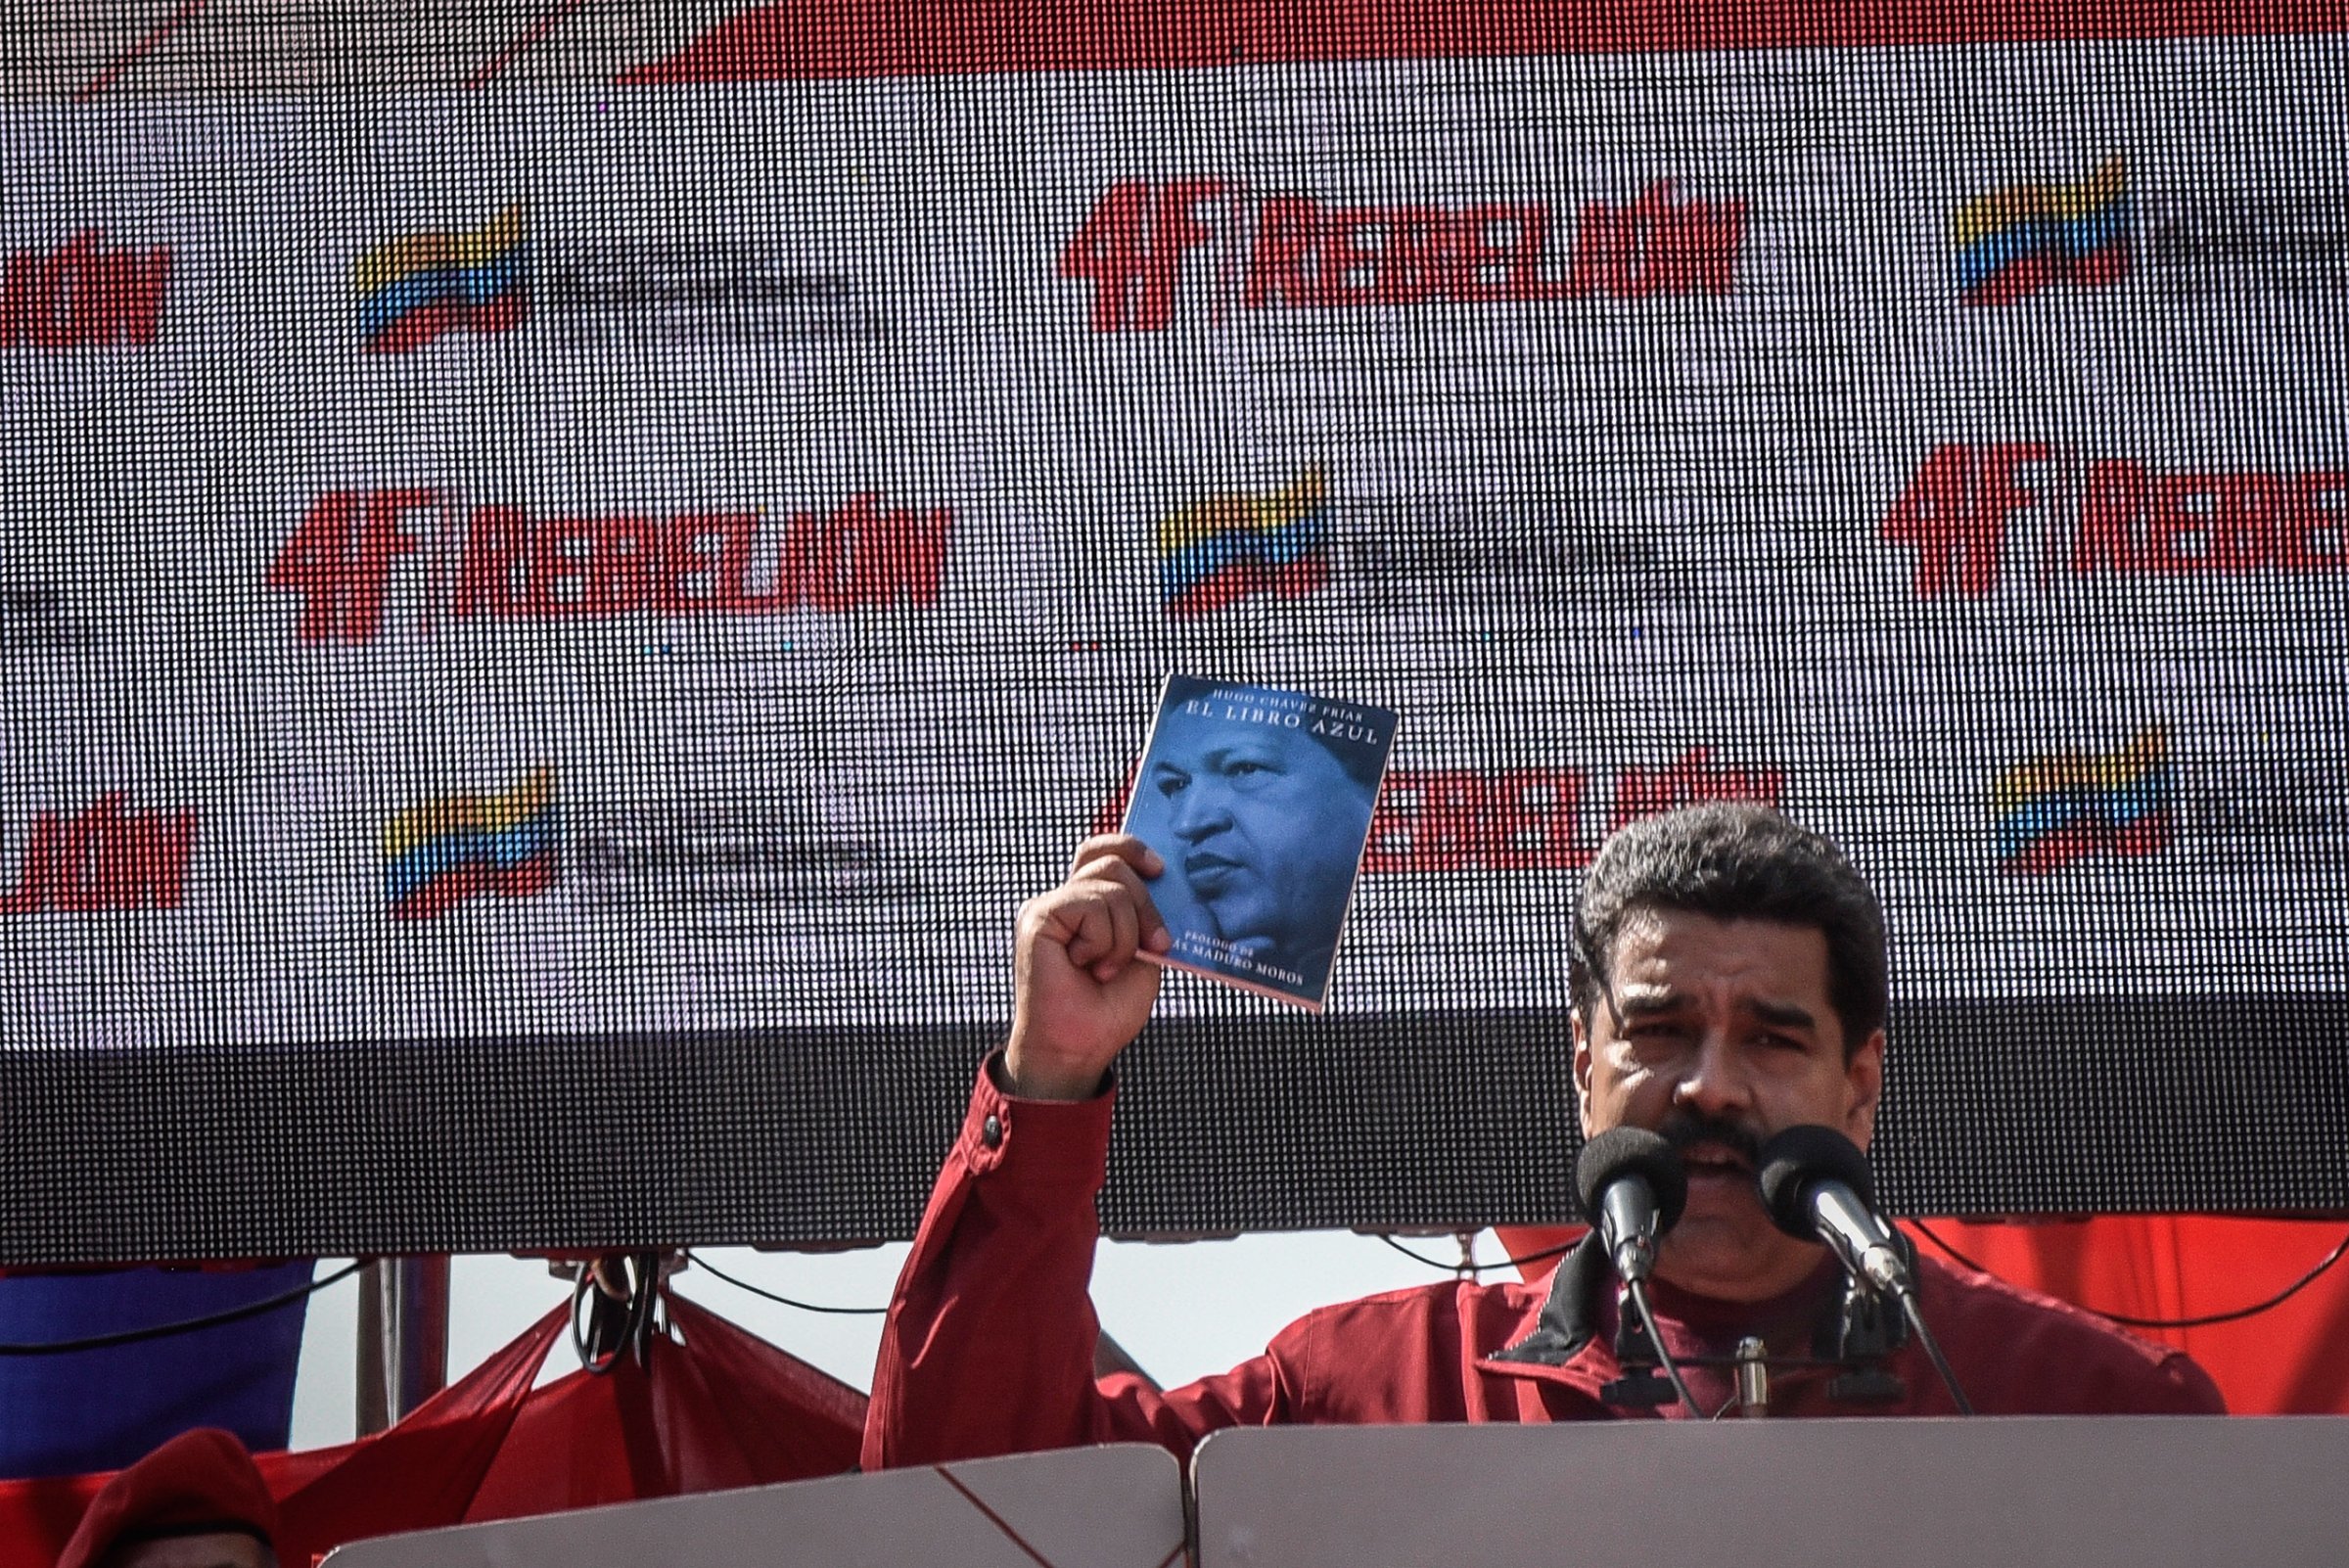 Venezuelan President Nicolás Maduro holds a copy of the El Libro Azul, or The Blue Book, written by his predecessor, Hugo Chávez, while speaking at a rally to commemorate the 24th anniversary of Chávez's failed military coup in Caracas, Venezuela, Feb. 4, 2016.